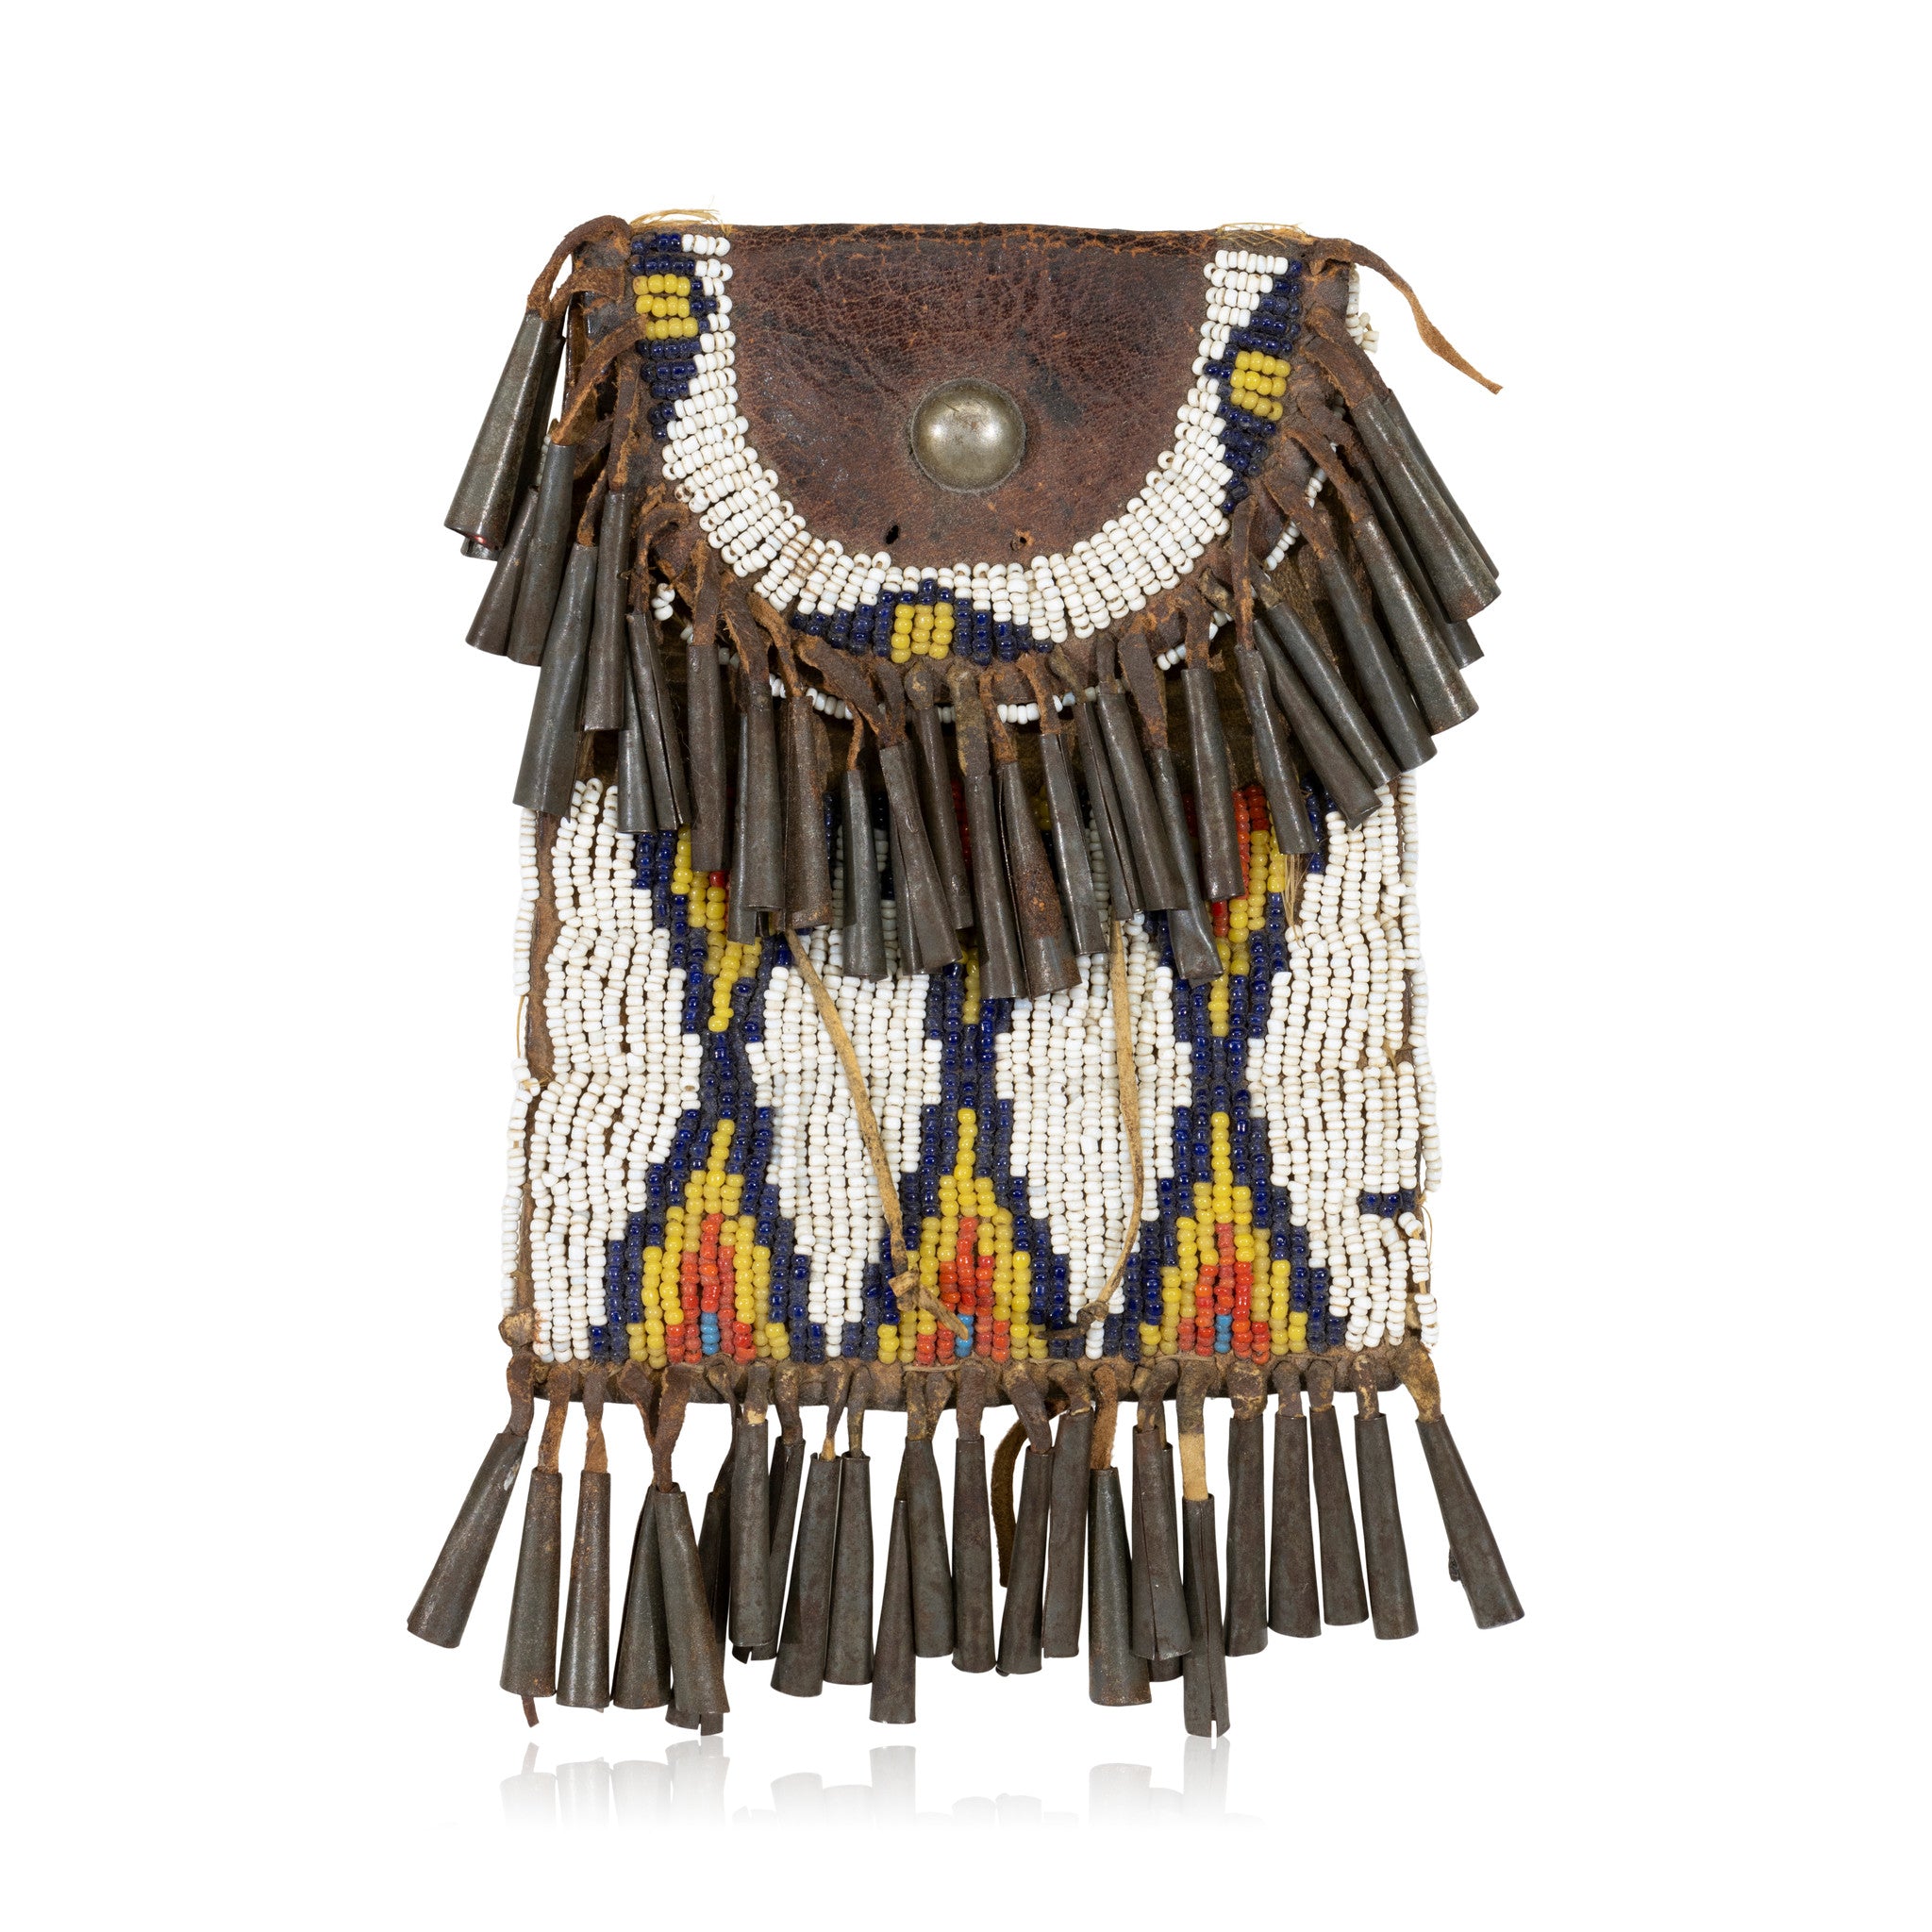 Sioux Strike A Light Pouch, Native, Beadwork, Other Bag